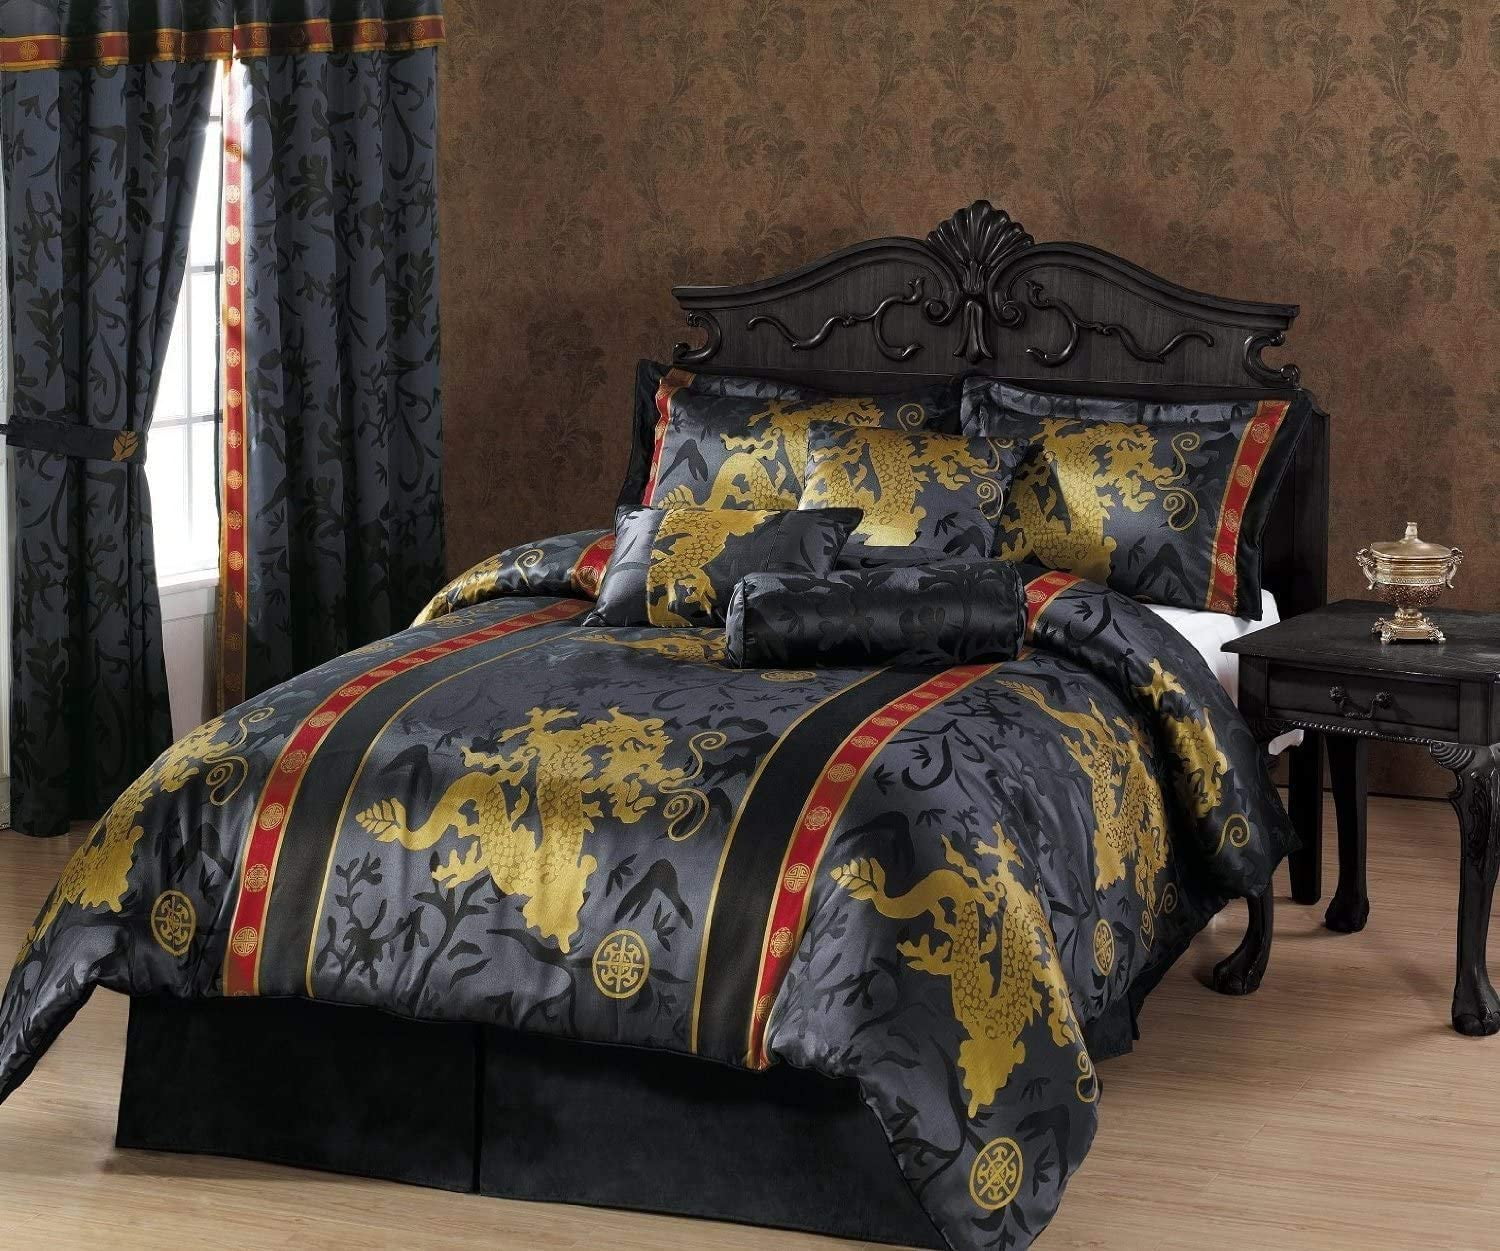 JACQUARD 7 PIECE QUILTED BEDSPREAD COMFORTER BEDDING SETS WITH EYELET CURTAINS